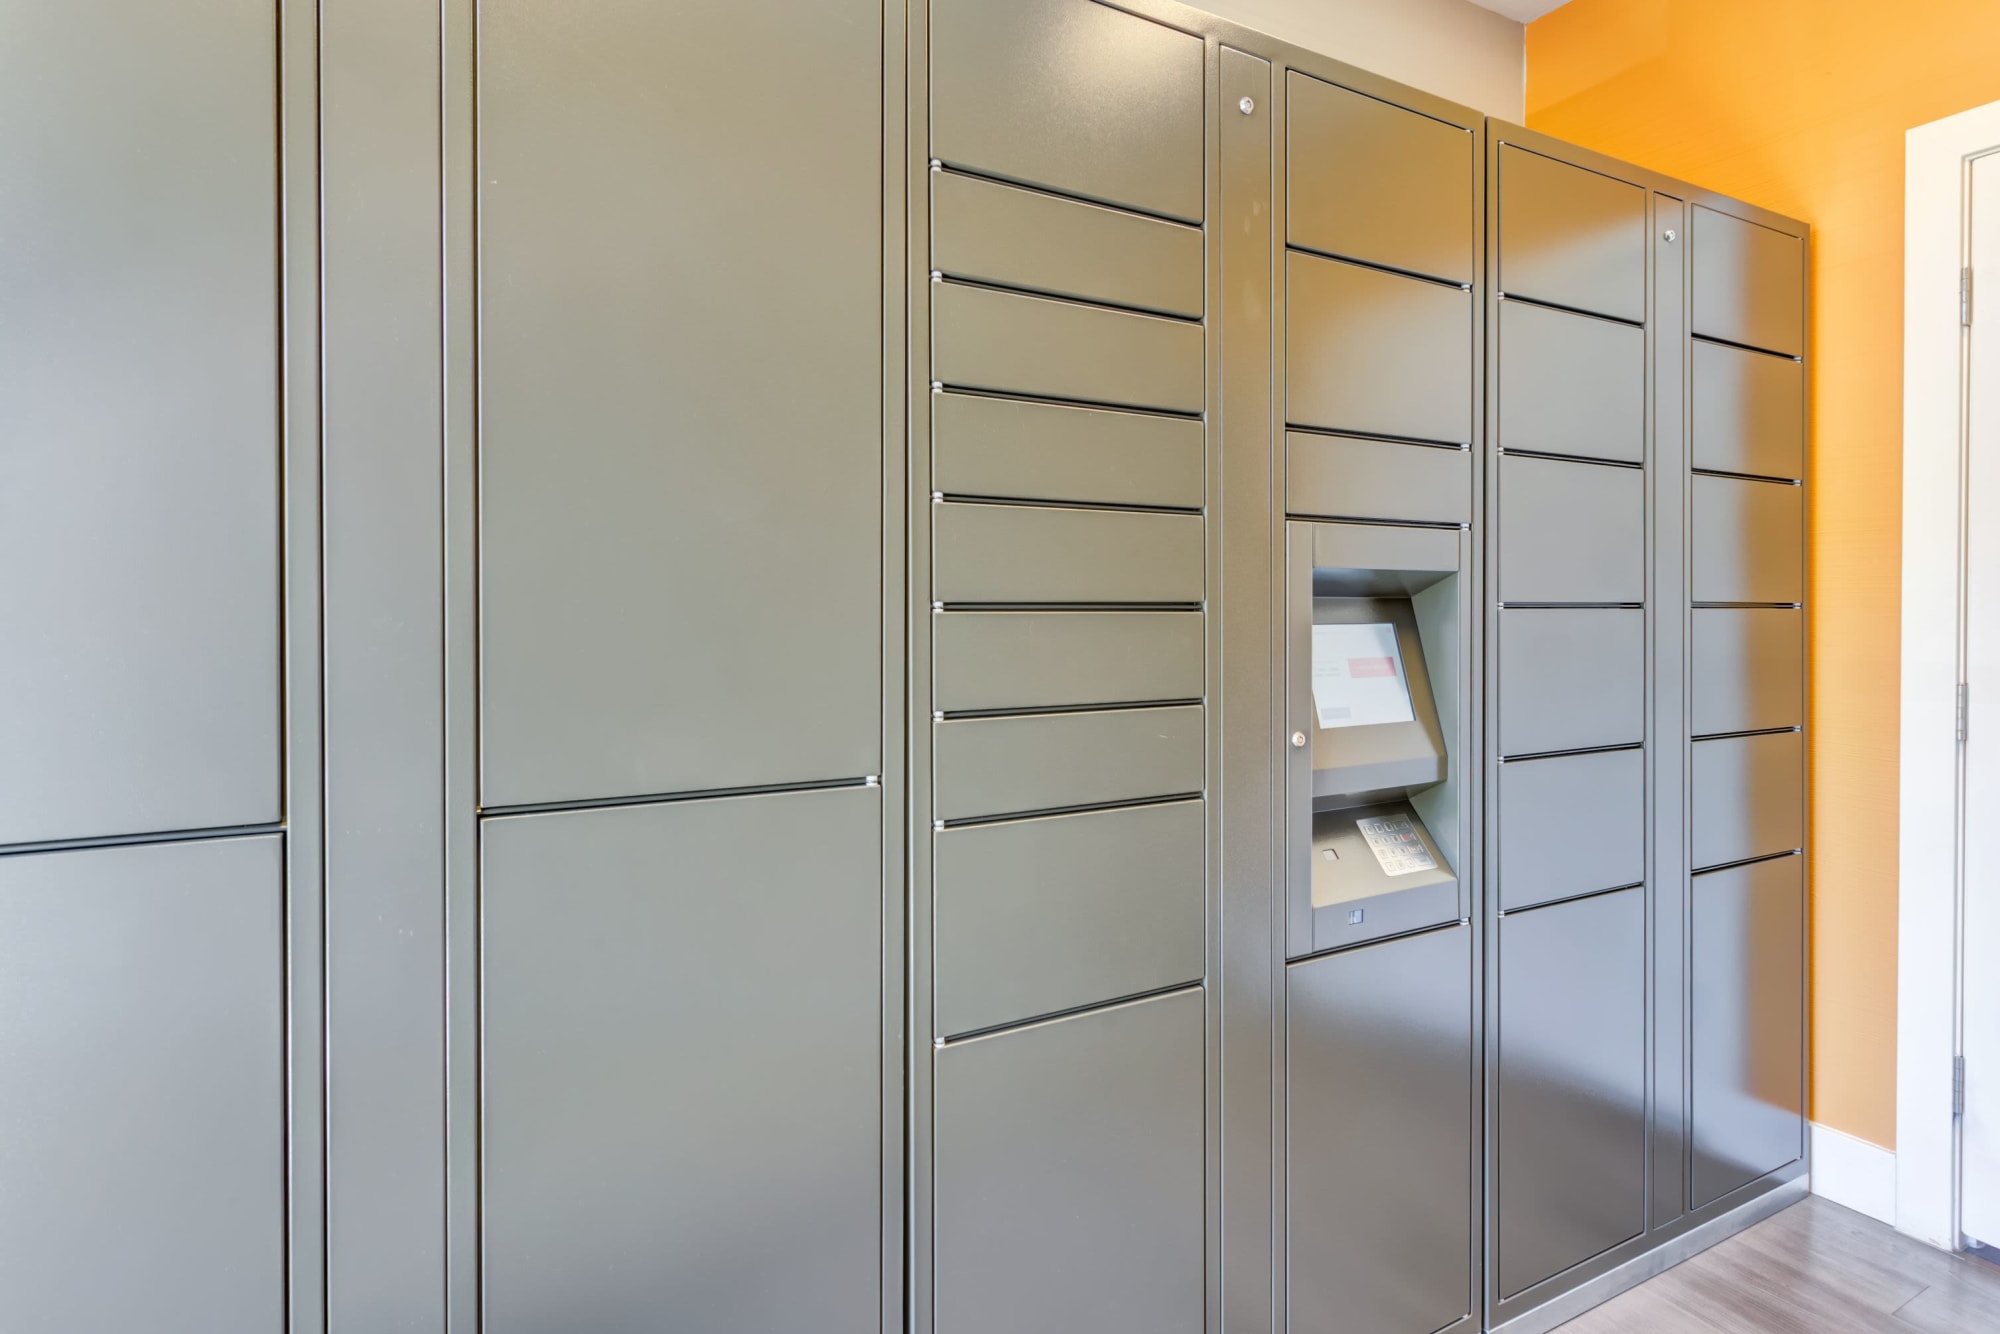 24-hour package lockers at Tuscany Village Apartments in Ontario, California